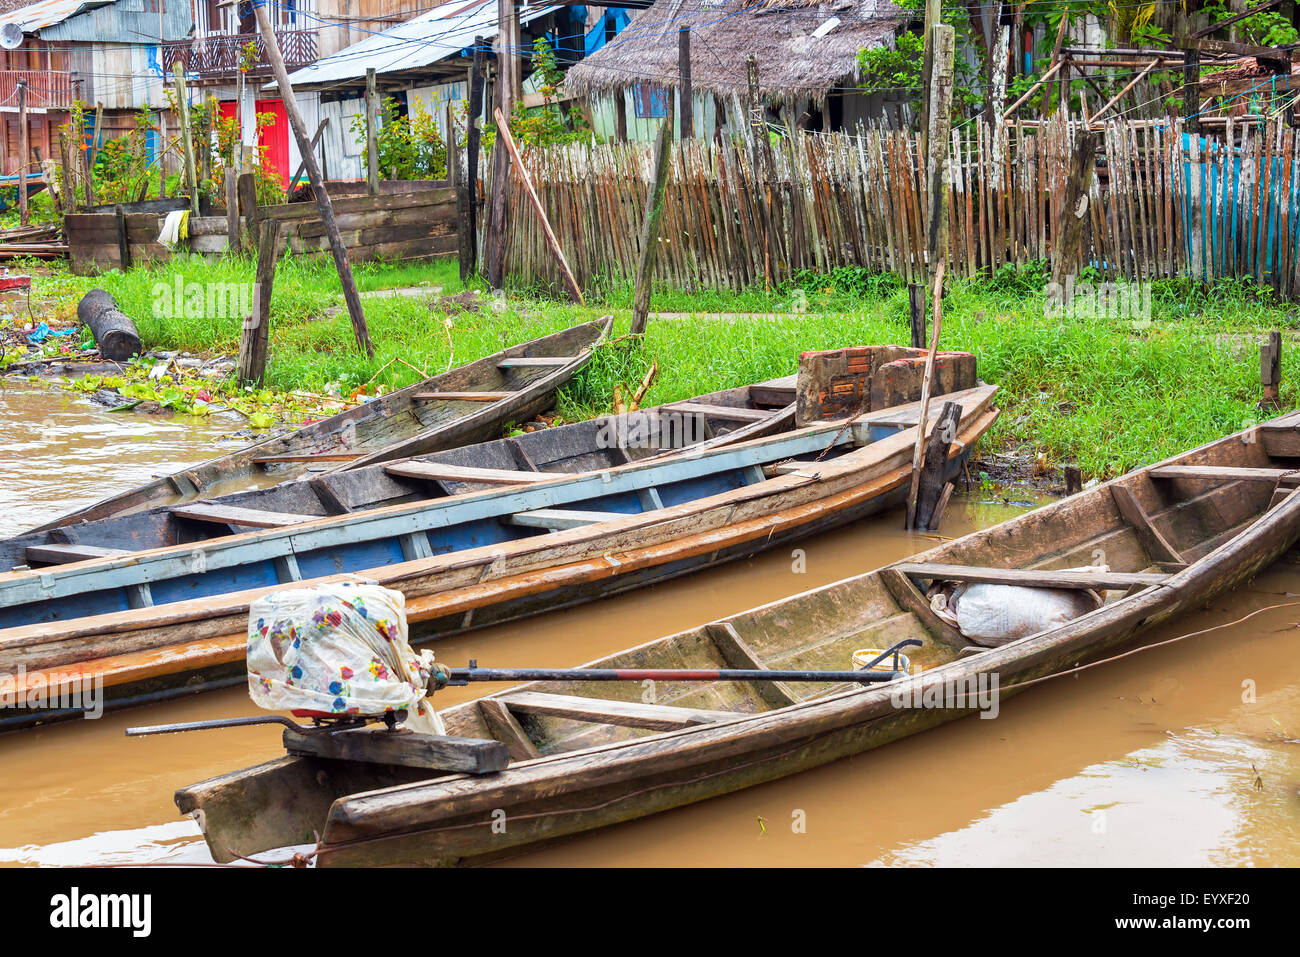 Canoes on the edge of the Amazon River in the town of Tamshiyacu near Iquitos, Peru Stock Photo